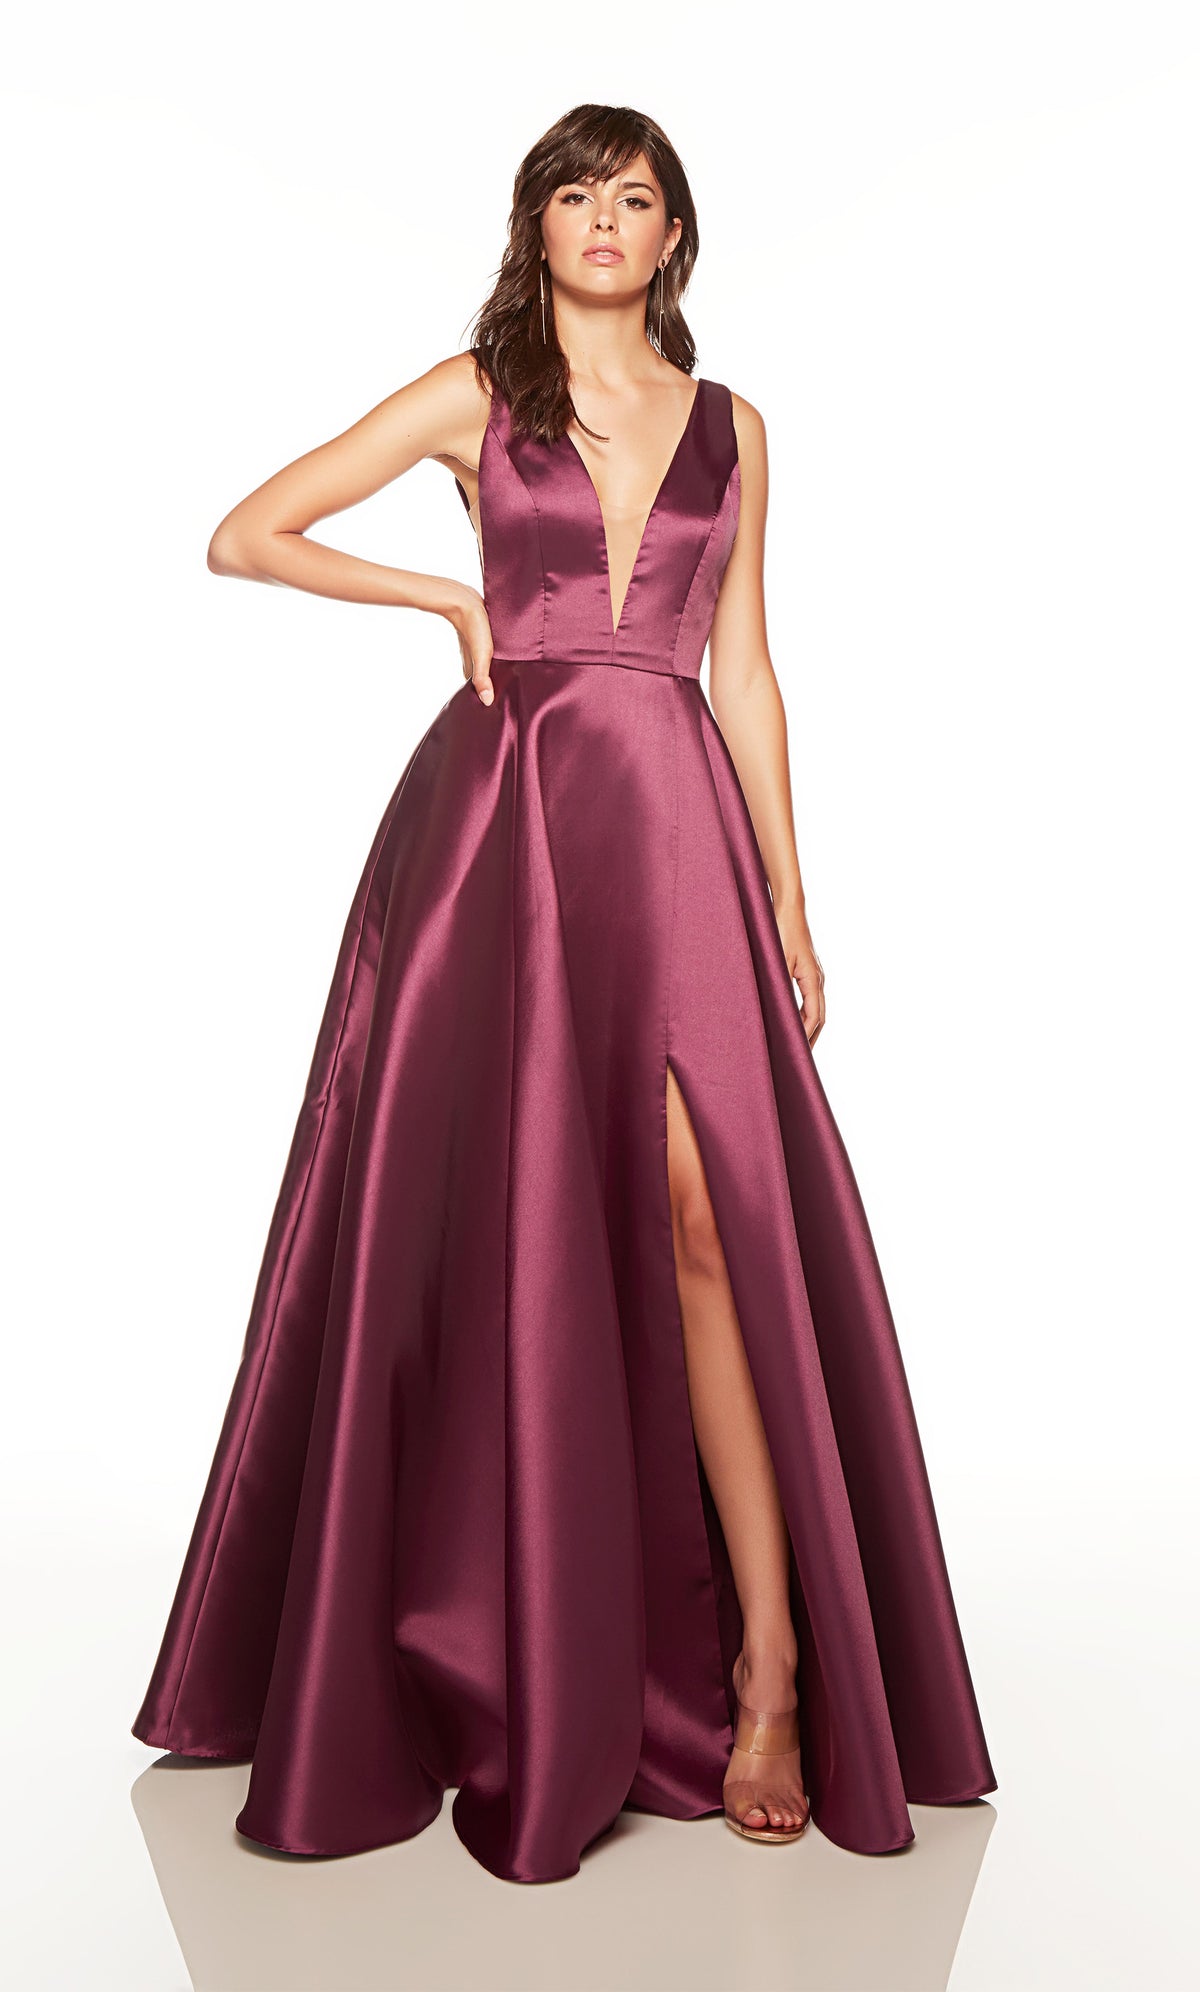 Long prom dress with a plunging neckline and side slit in black plum color. COLOR-SWATCH_1752__BLACK-PLUM